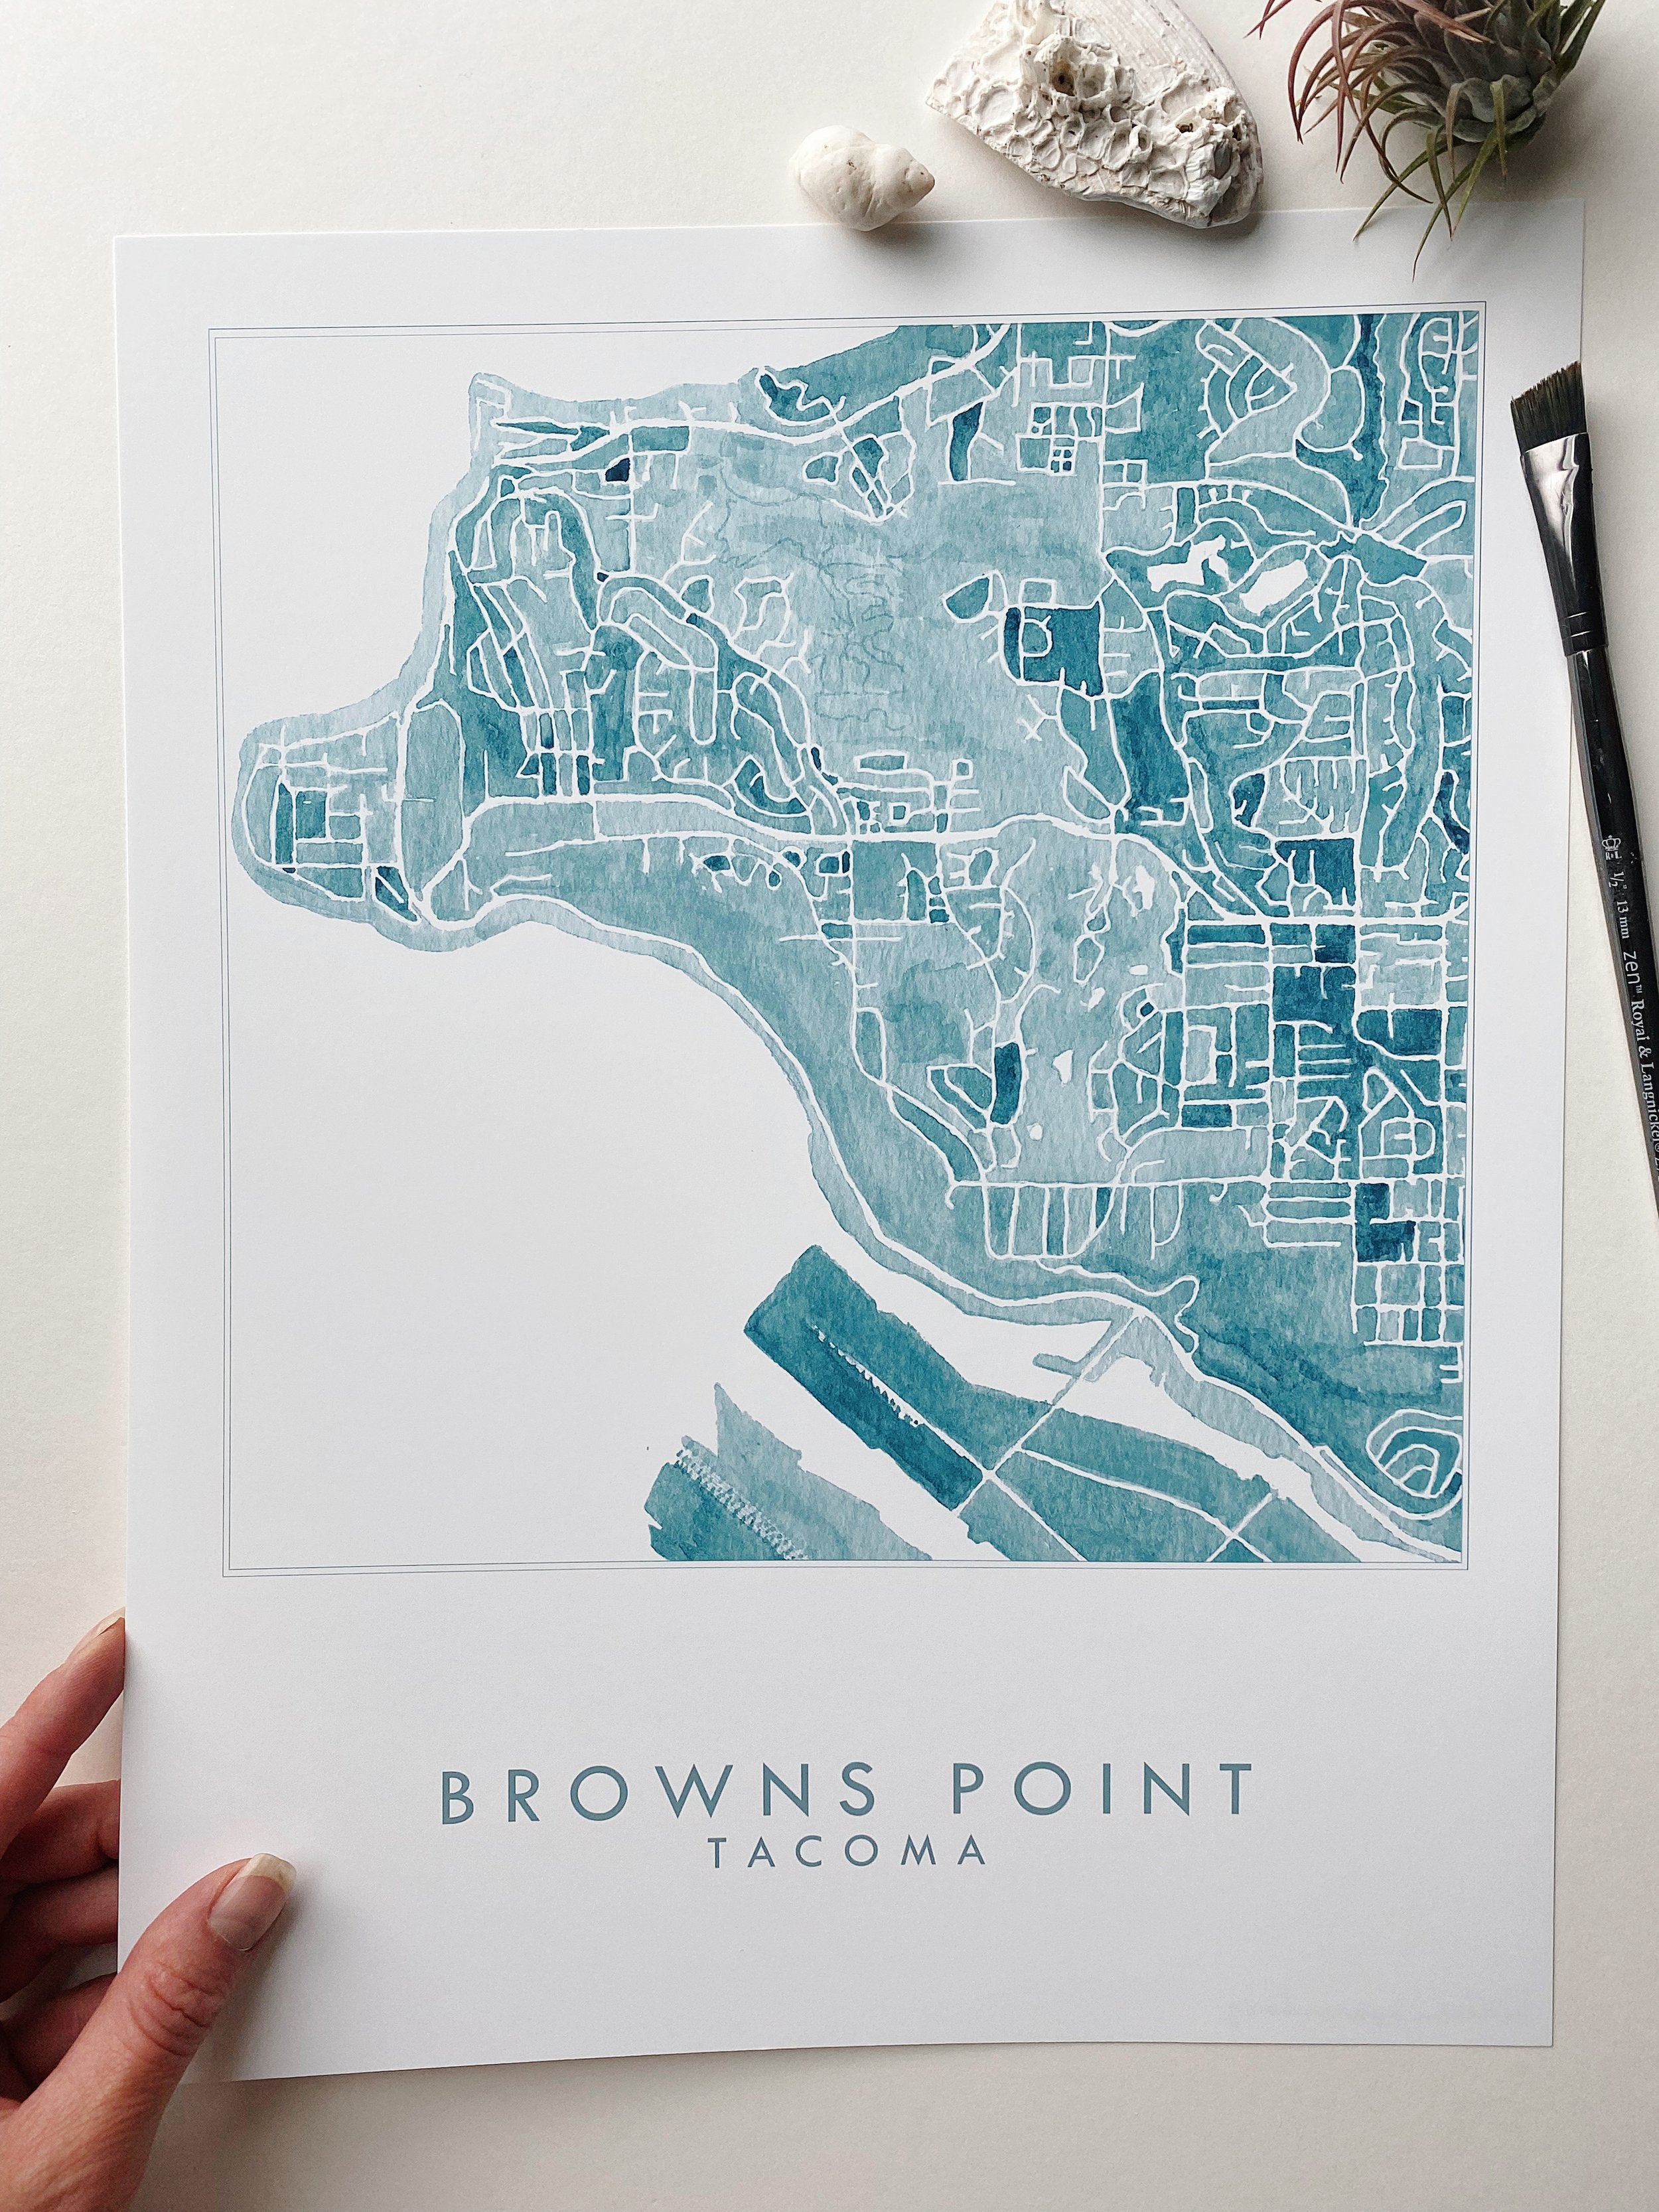 Browns Point TACOMA Neighborhood Watercolor Map: PRINT